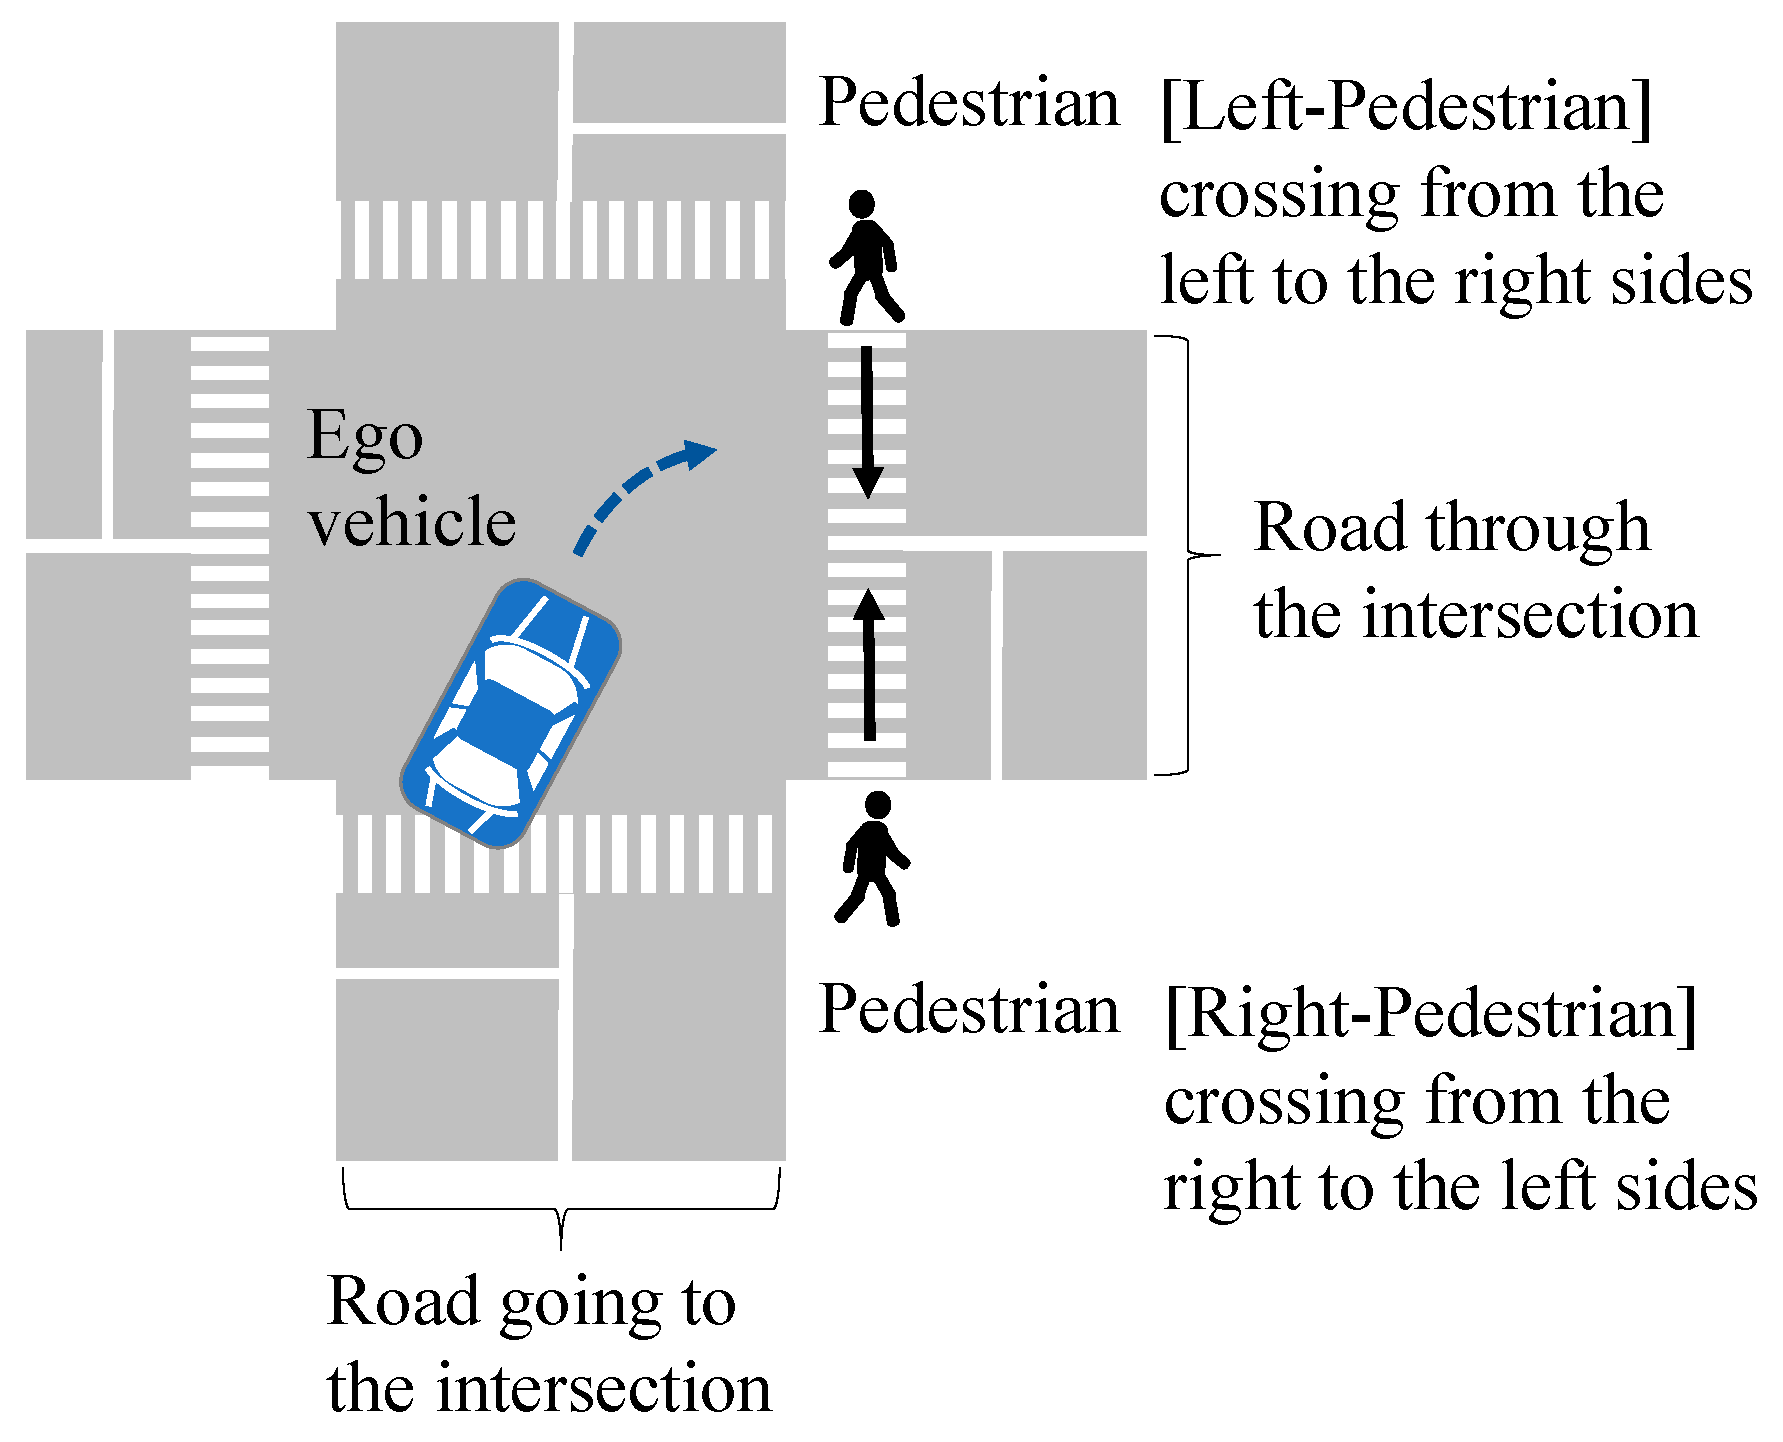 Rules for pedestrians (1 to 35)